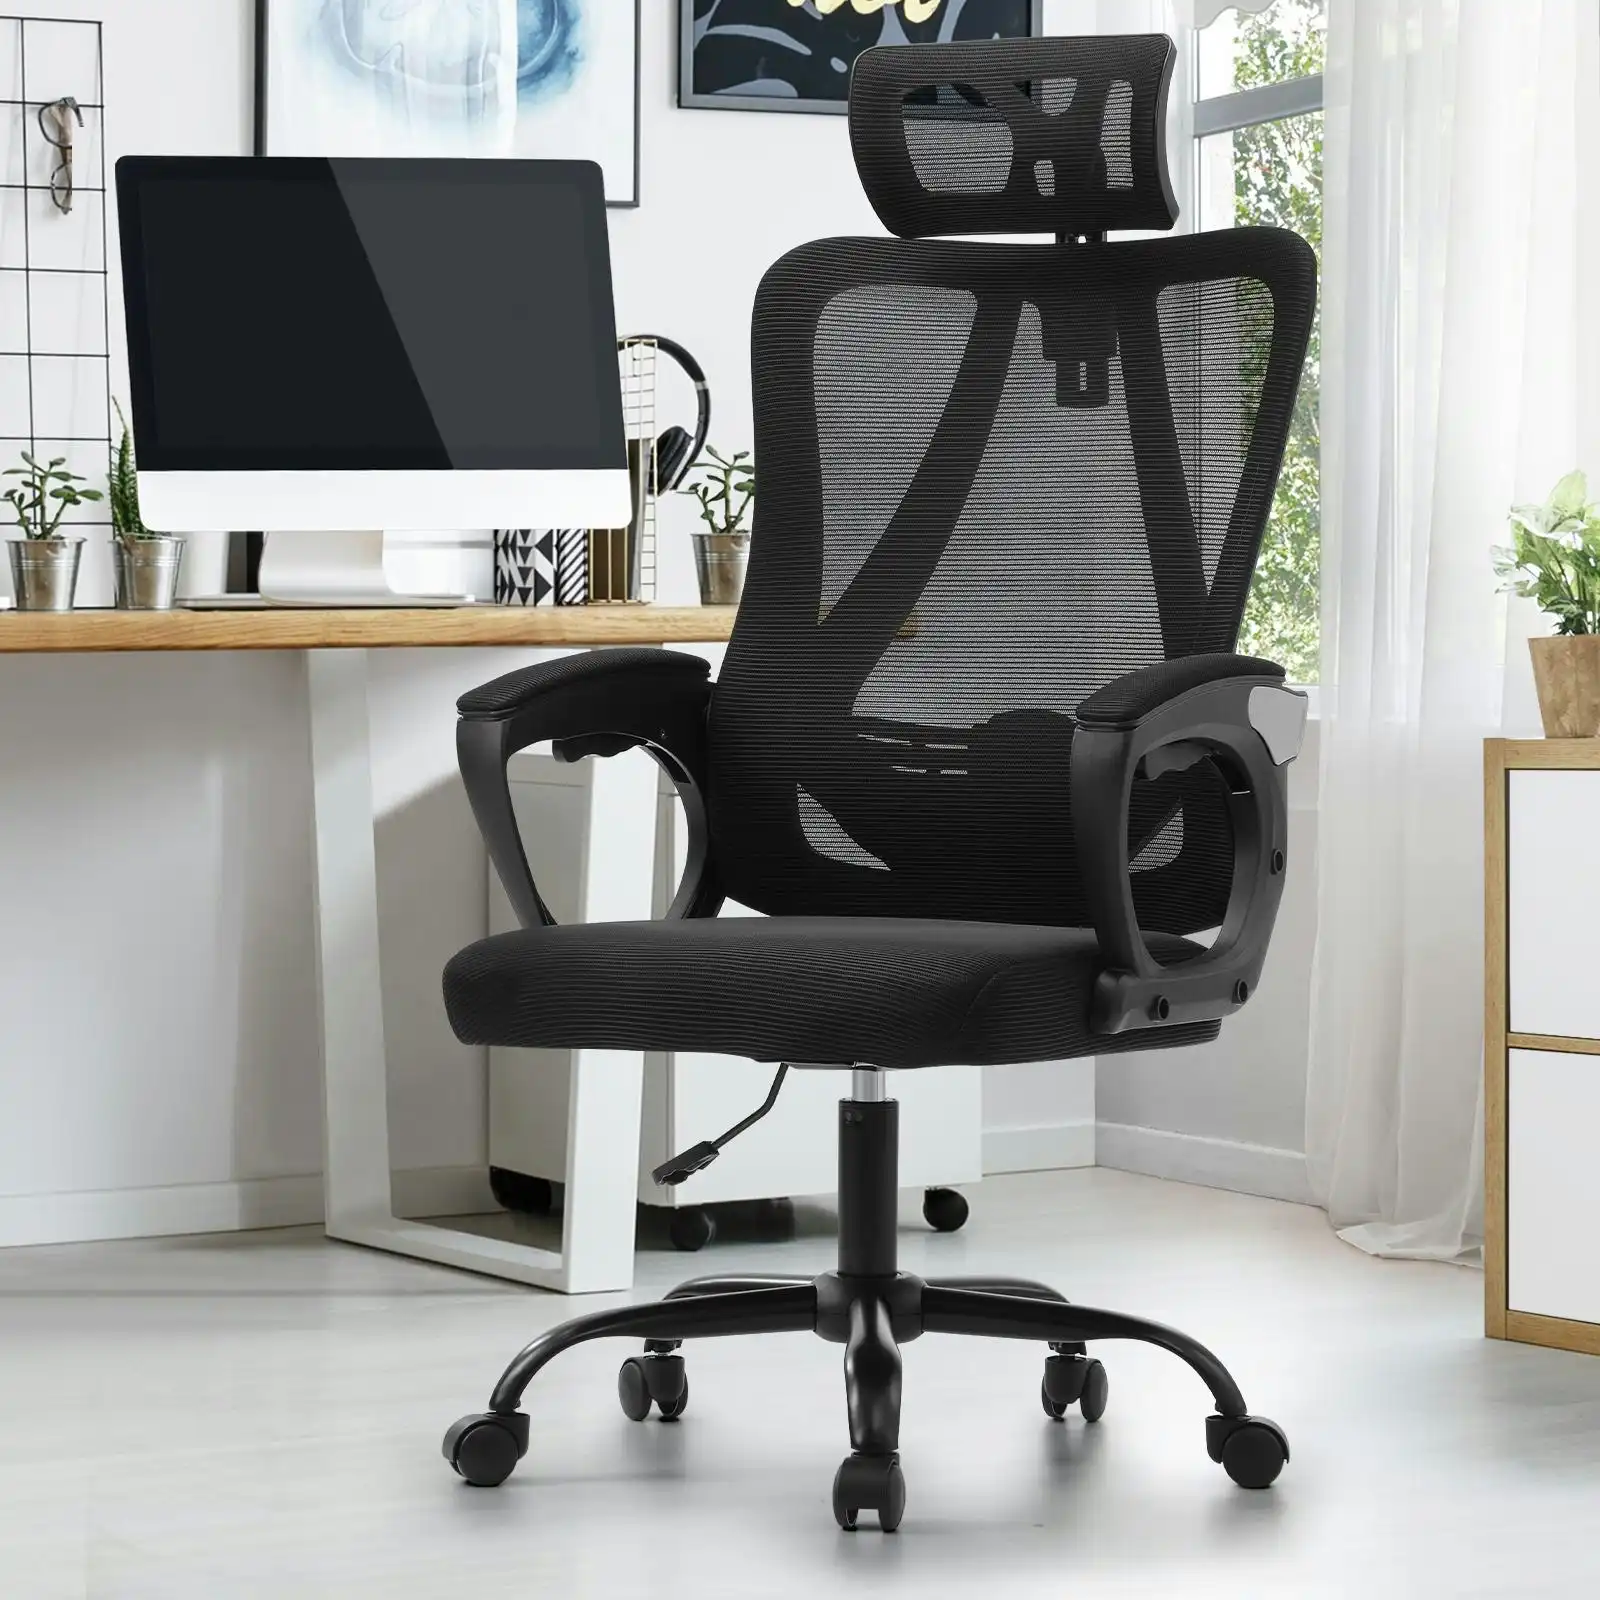 Oikiture Mesh Office Chair Adjustable Lumbar Support Reclining Computer Black-Premium Edition